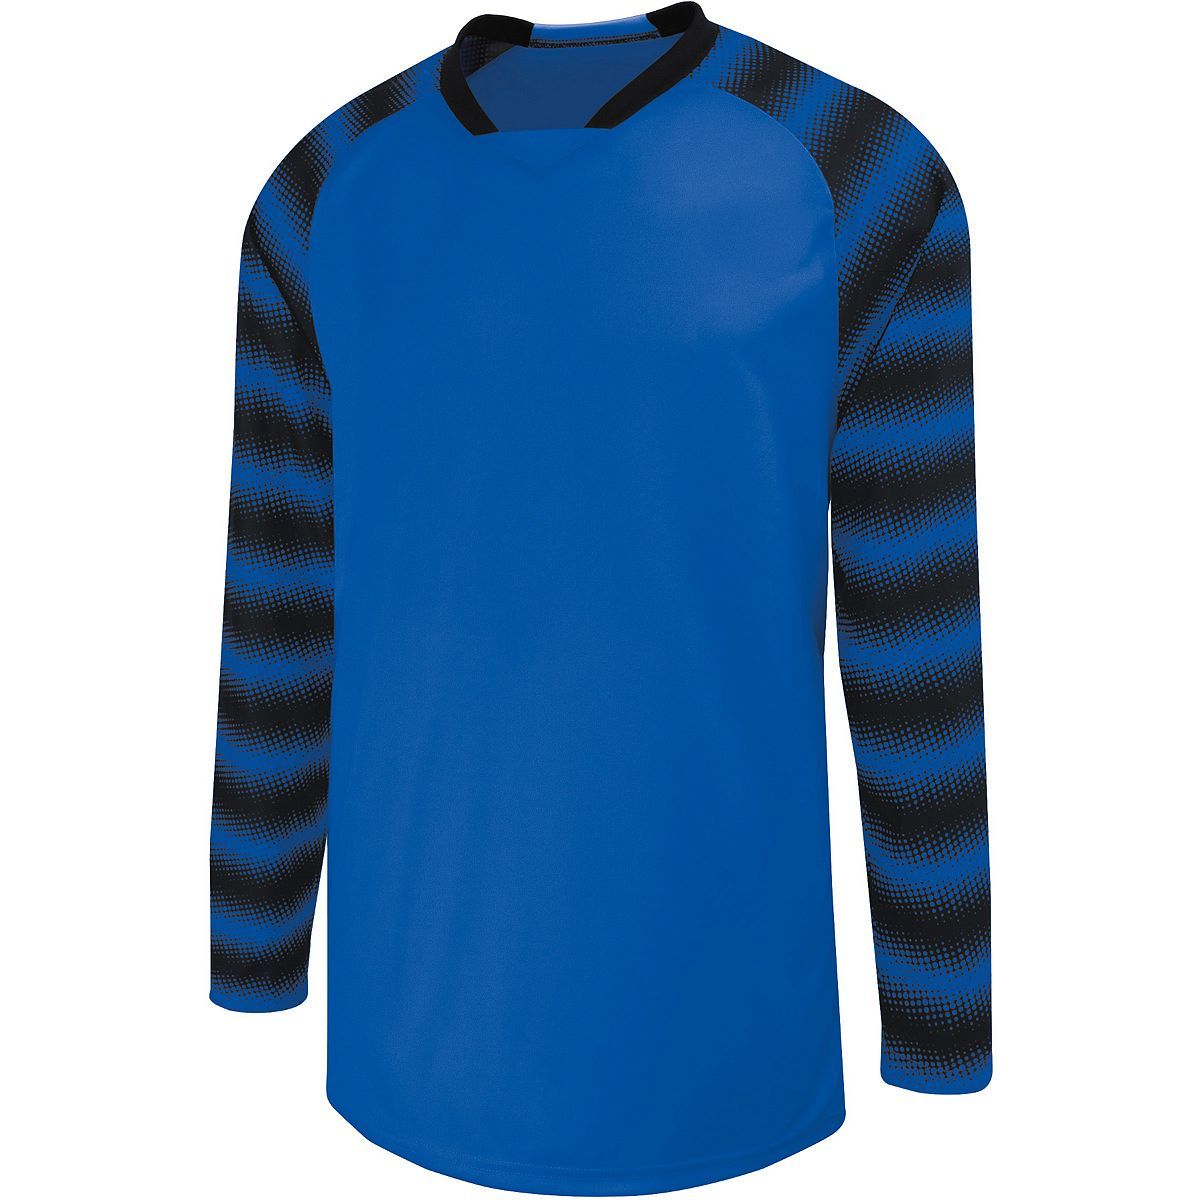 High 5 Youth Prism Goalkeeper Jersey in Royal/Black  -Part of the Youth, Youth-Jersey, High5-Products, Soccer, Shirts, All-Sports-1 product lines at KanaleyCreations.com